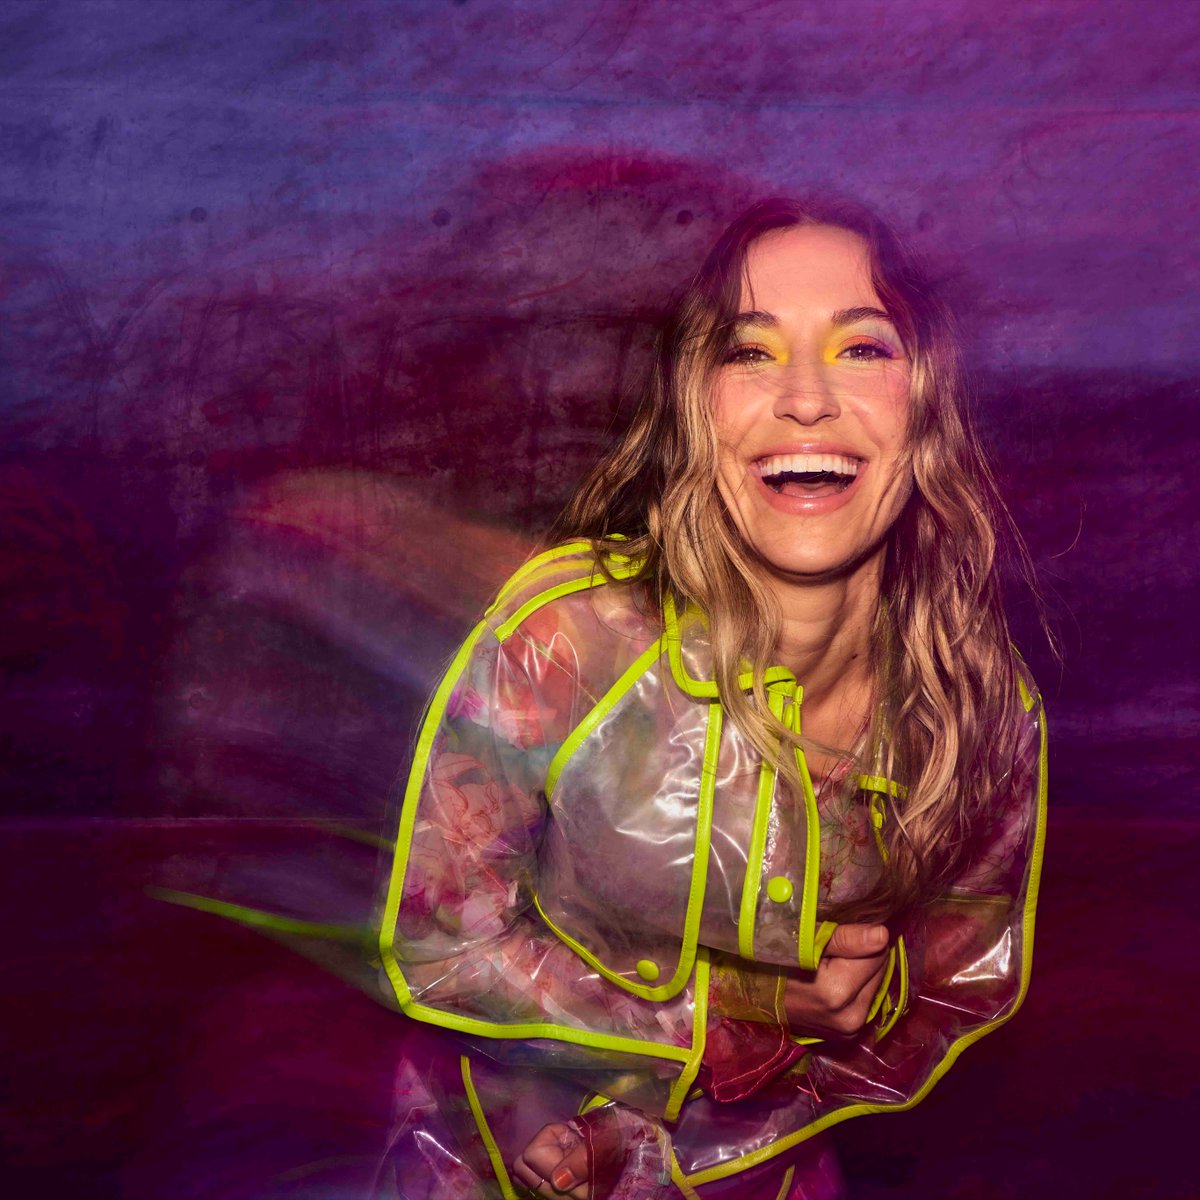 .@Lauren_Daigle teams up with @BlessingOffor for 'These Are The Days' 💚 Hear it on FLIGHT: pandora.app.link/kCdDn12c2Gb